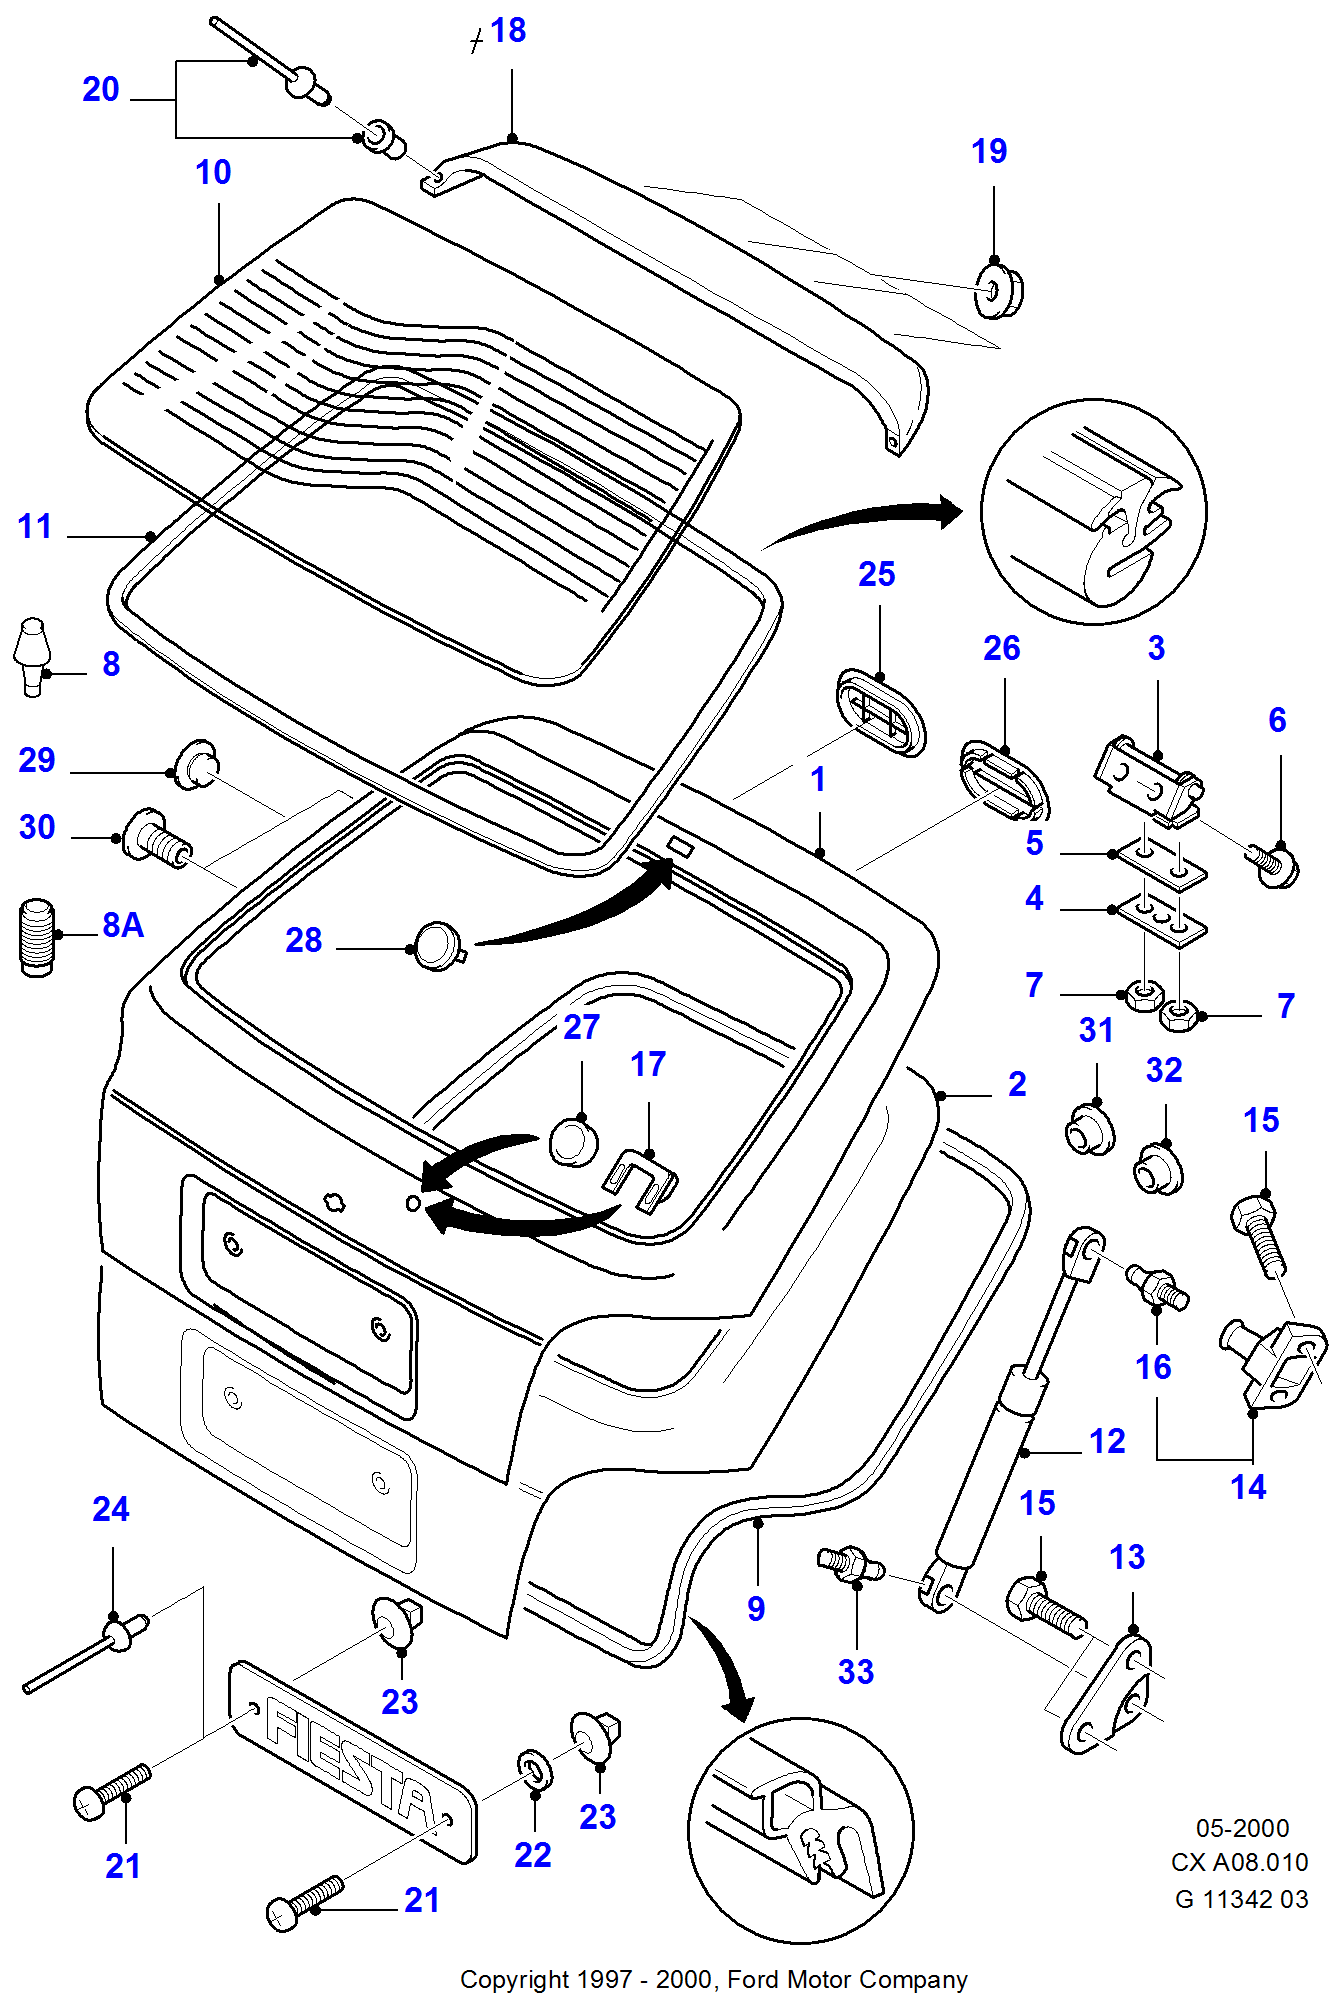 Tailgate And Related Parts dėl Ford Fiesta Fiesta 1989-1996               (CX)